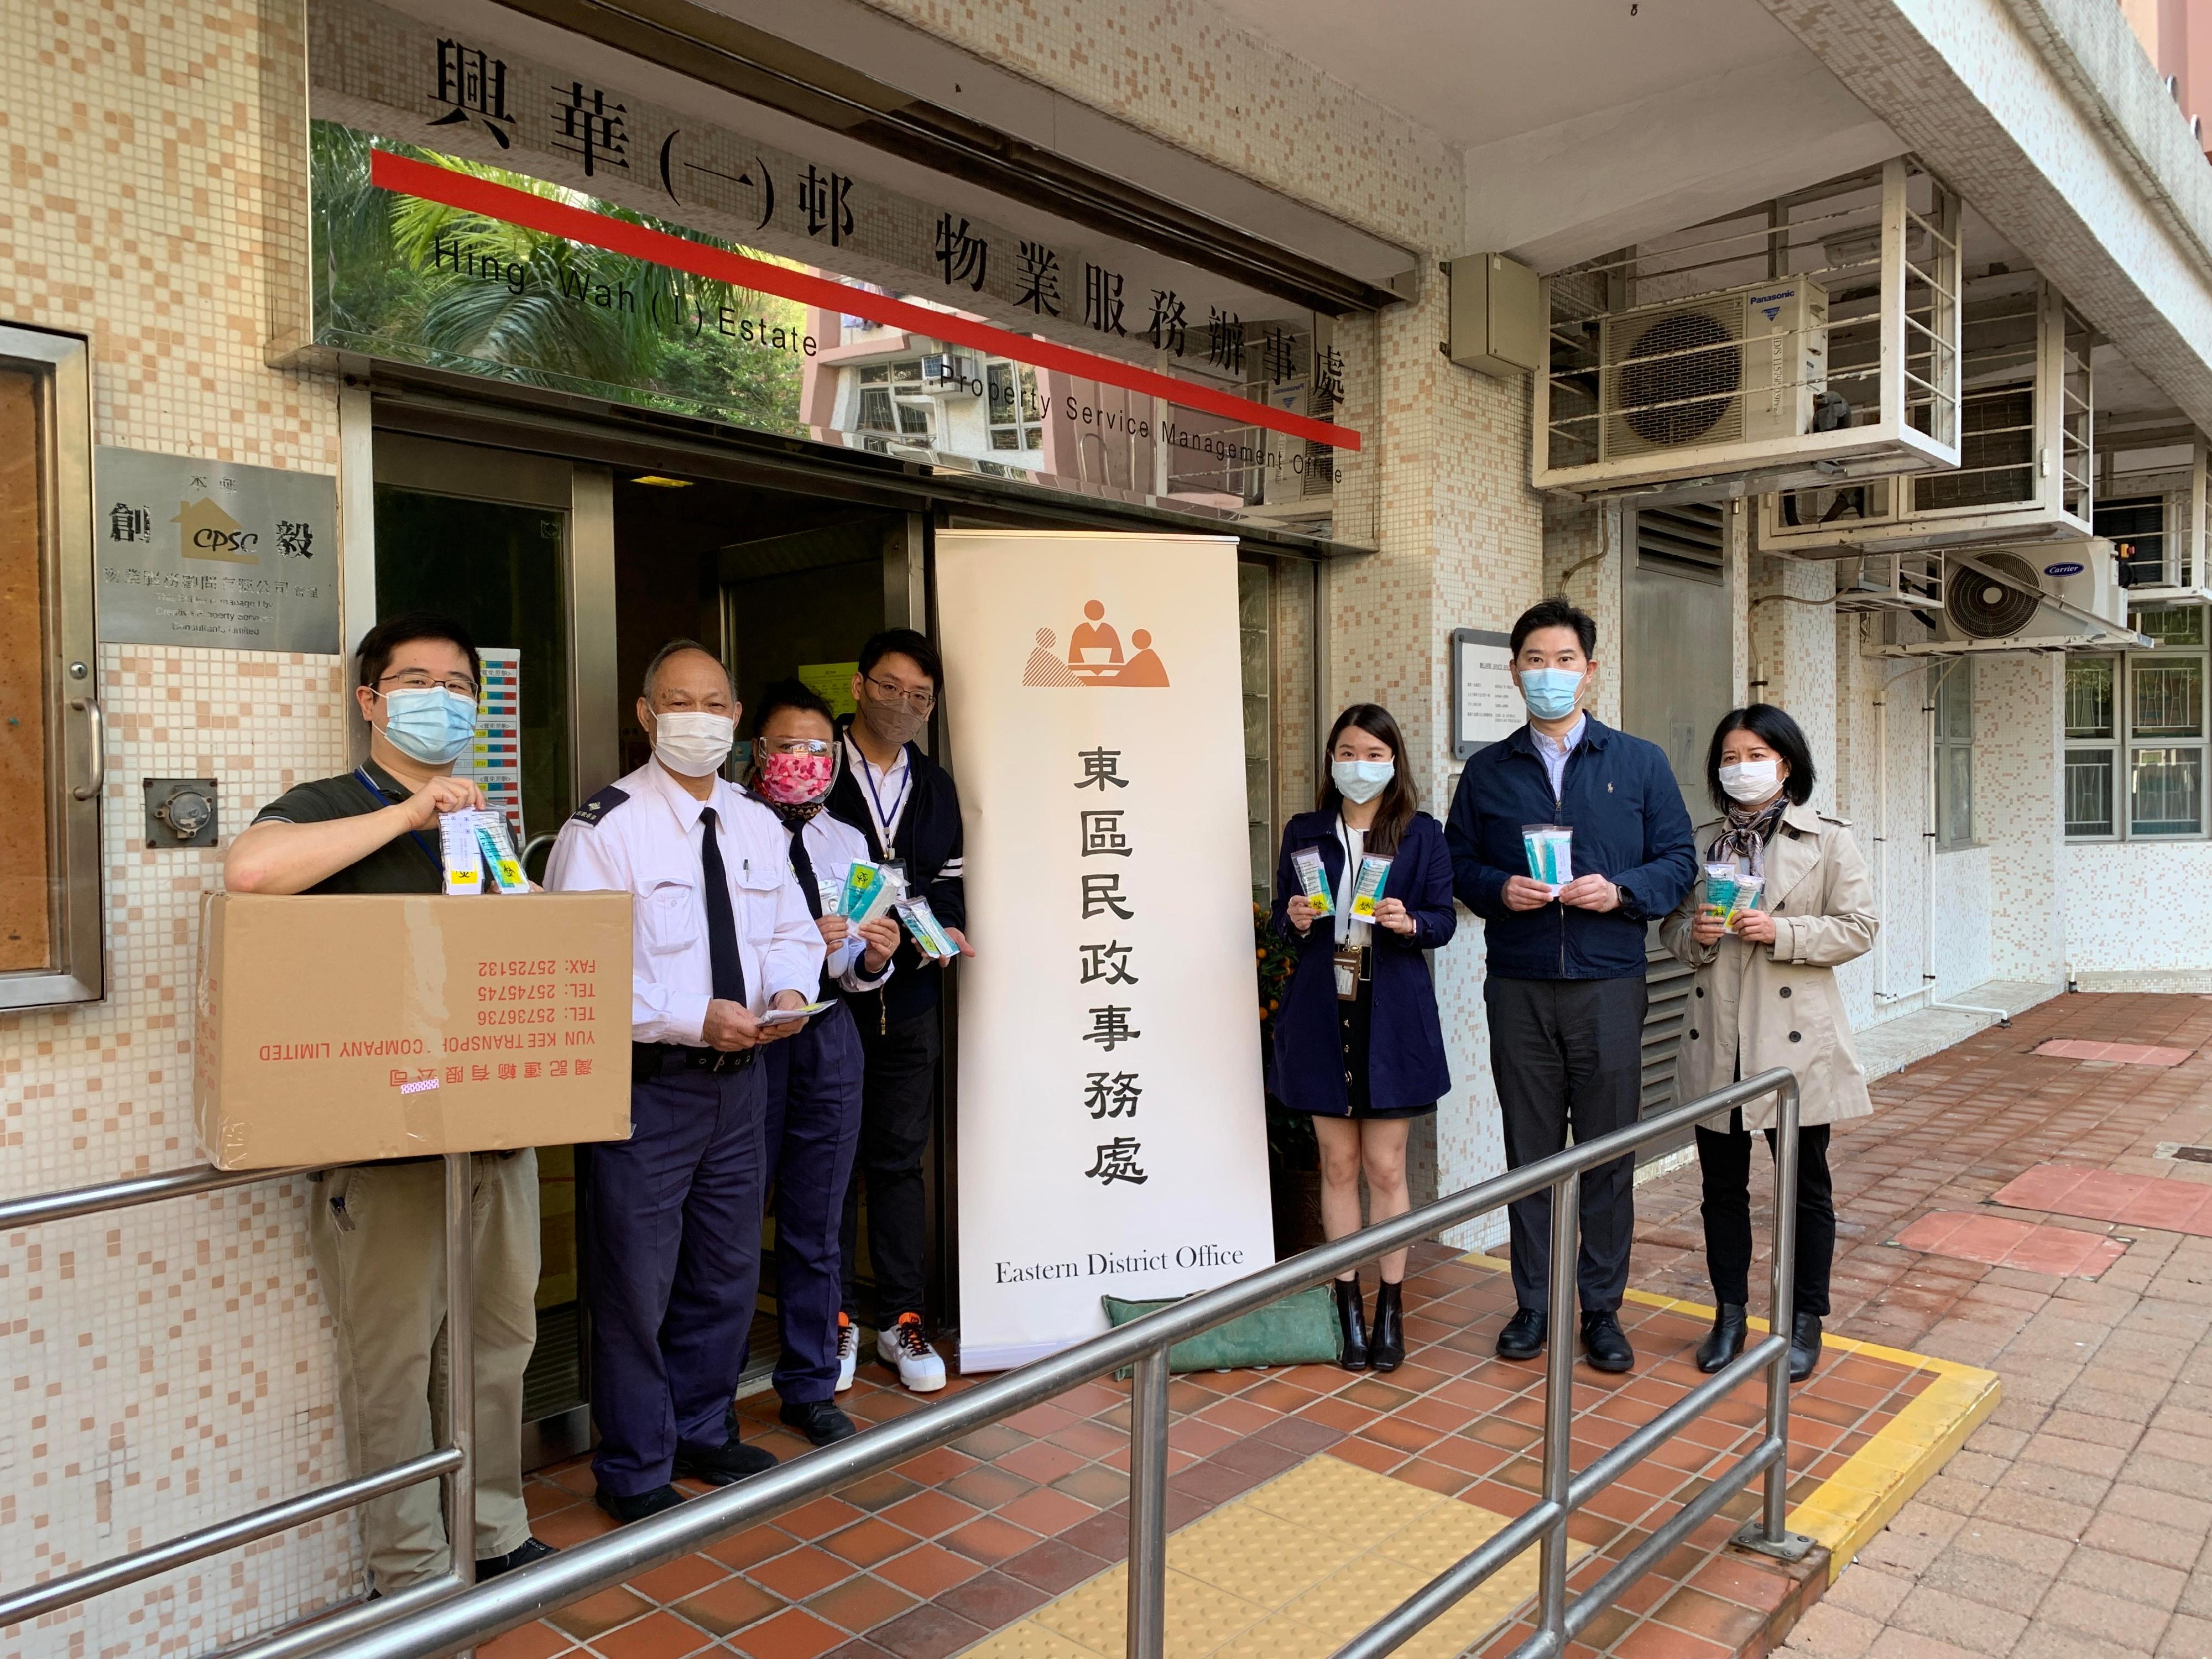 The Eastern District Office today (February 15) distributed COVID-19 rapid test kits to cleansing workers and property management staff working in Hing Wah (I) Estate and Hing Wah (II) Estate for voluntary testing through the estates' property management company and the Housing Department.